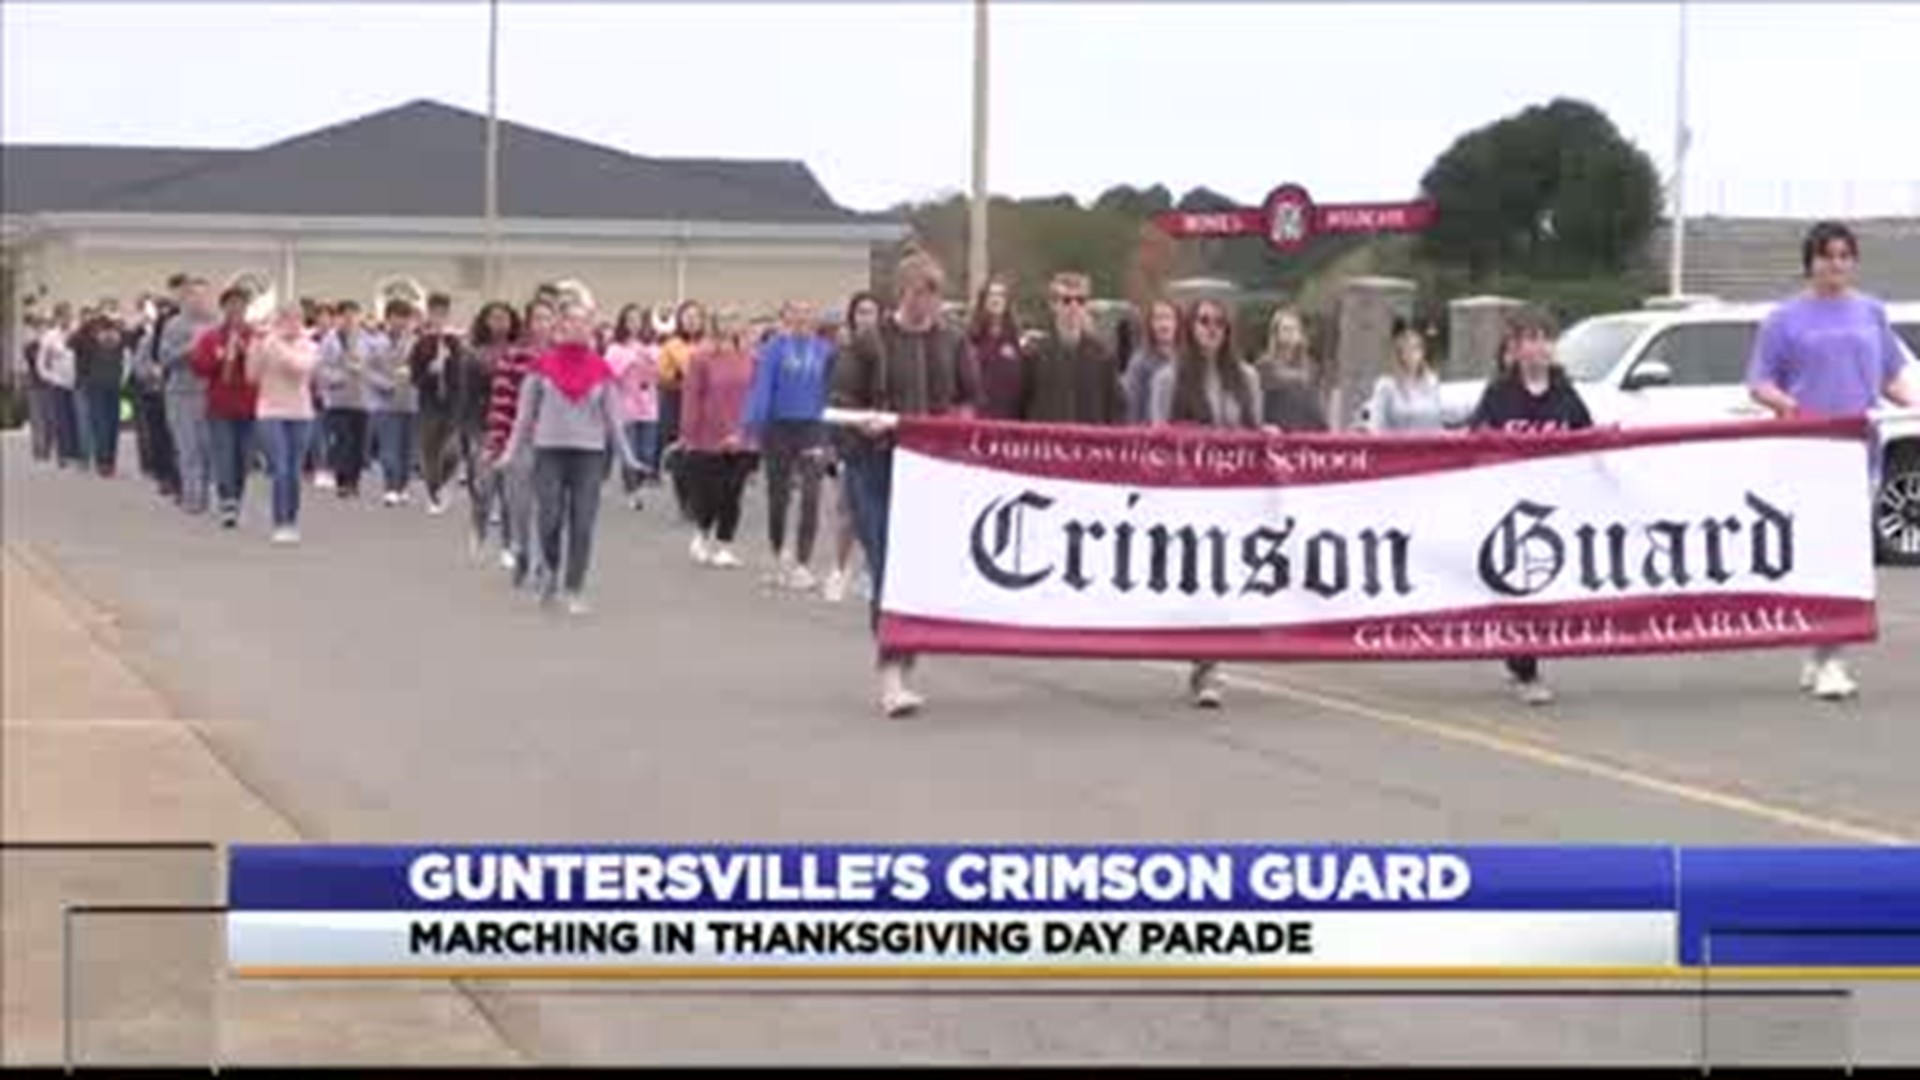 The Guntersville High School band had their last practice today before heading to Philadelphia to march in the 2019 Thanksgiving Day Parade.